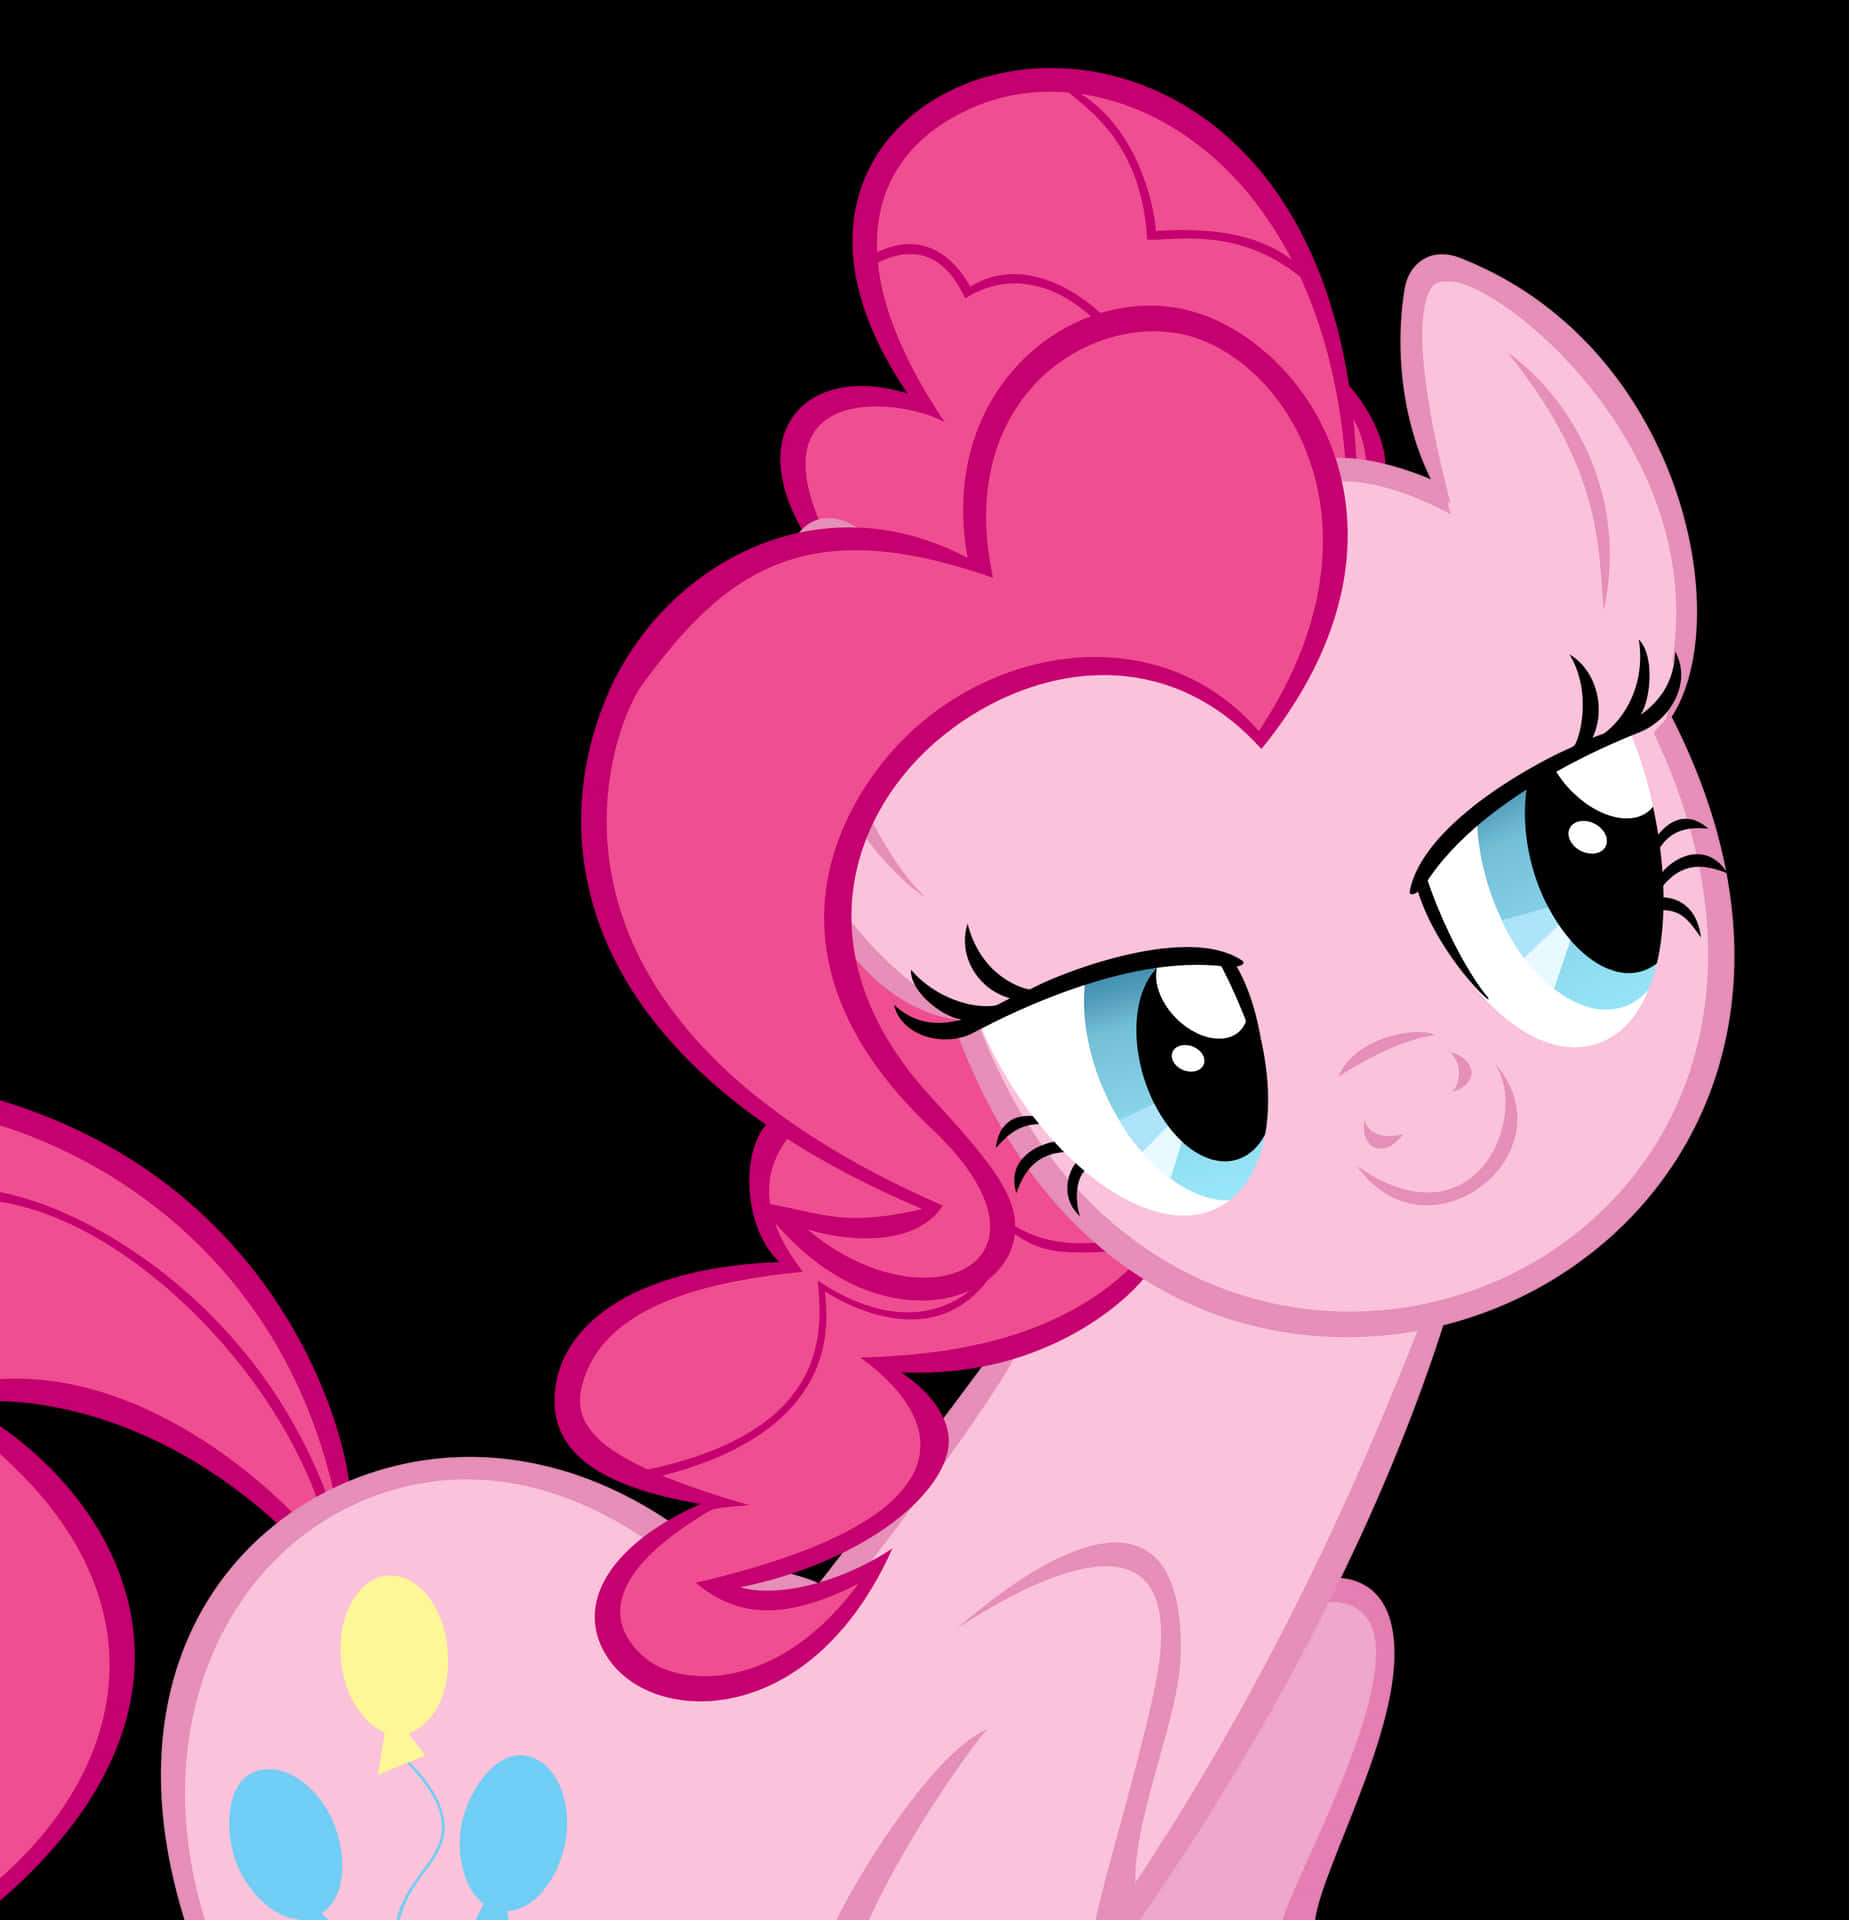 Magical fun for all with Pinkie Pie!